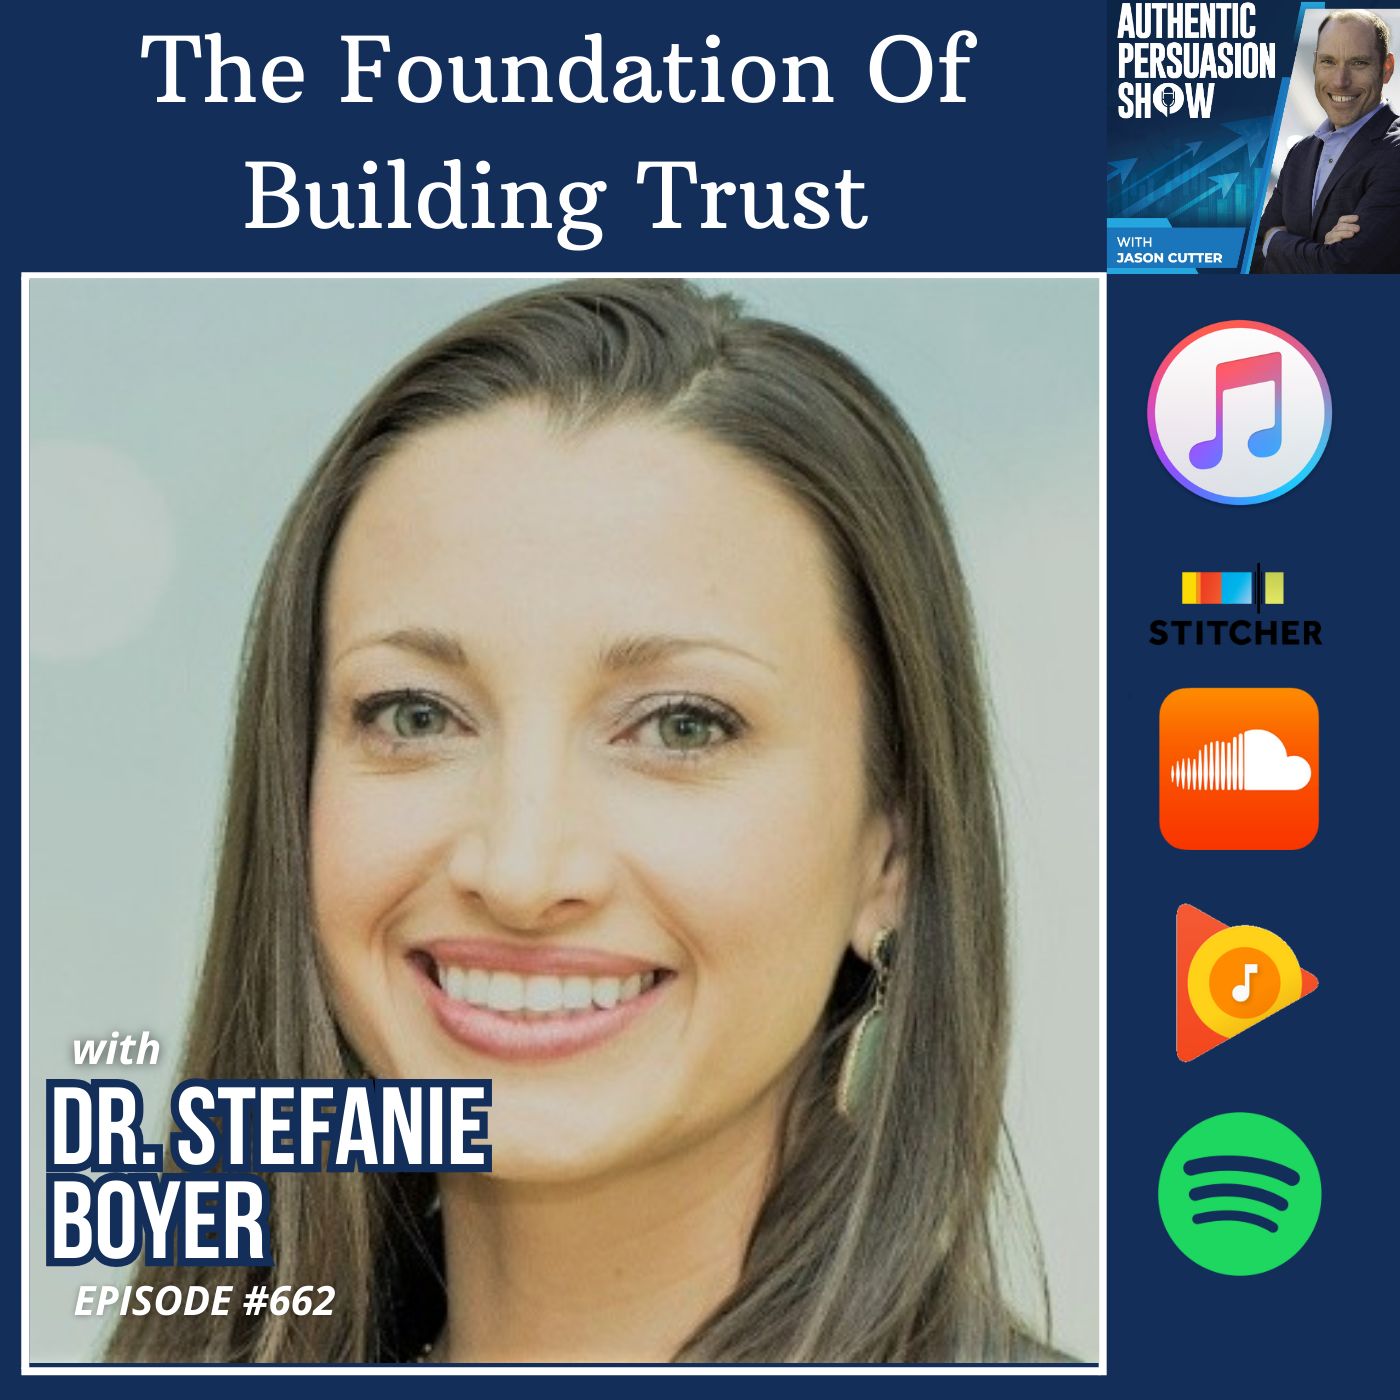 [662] The Foundation Of Building Trust, with Dr. Stefanie Boyer from Bryant University